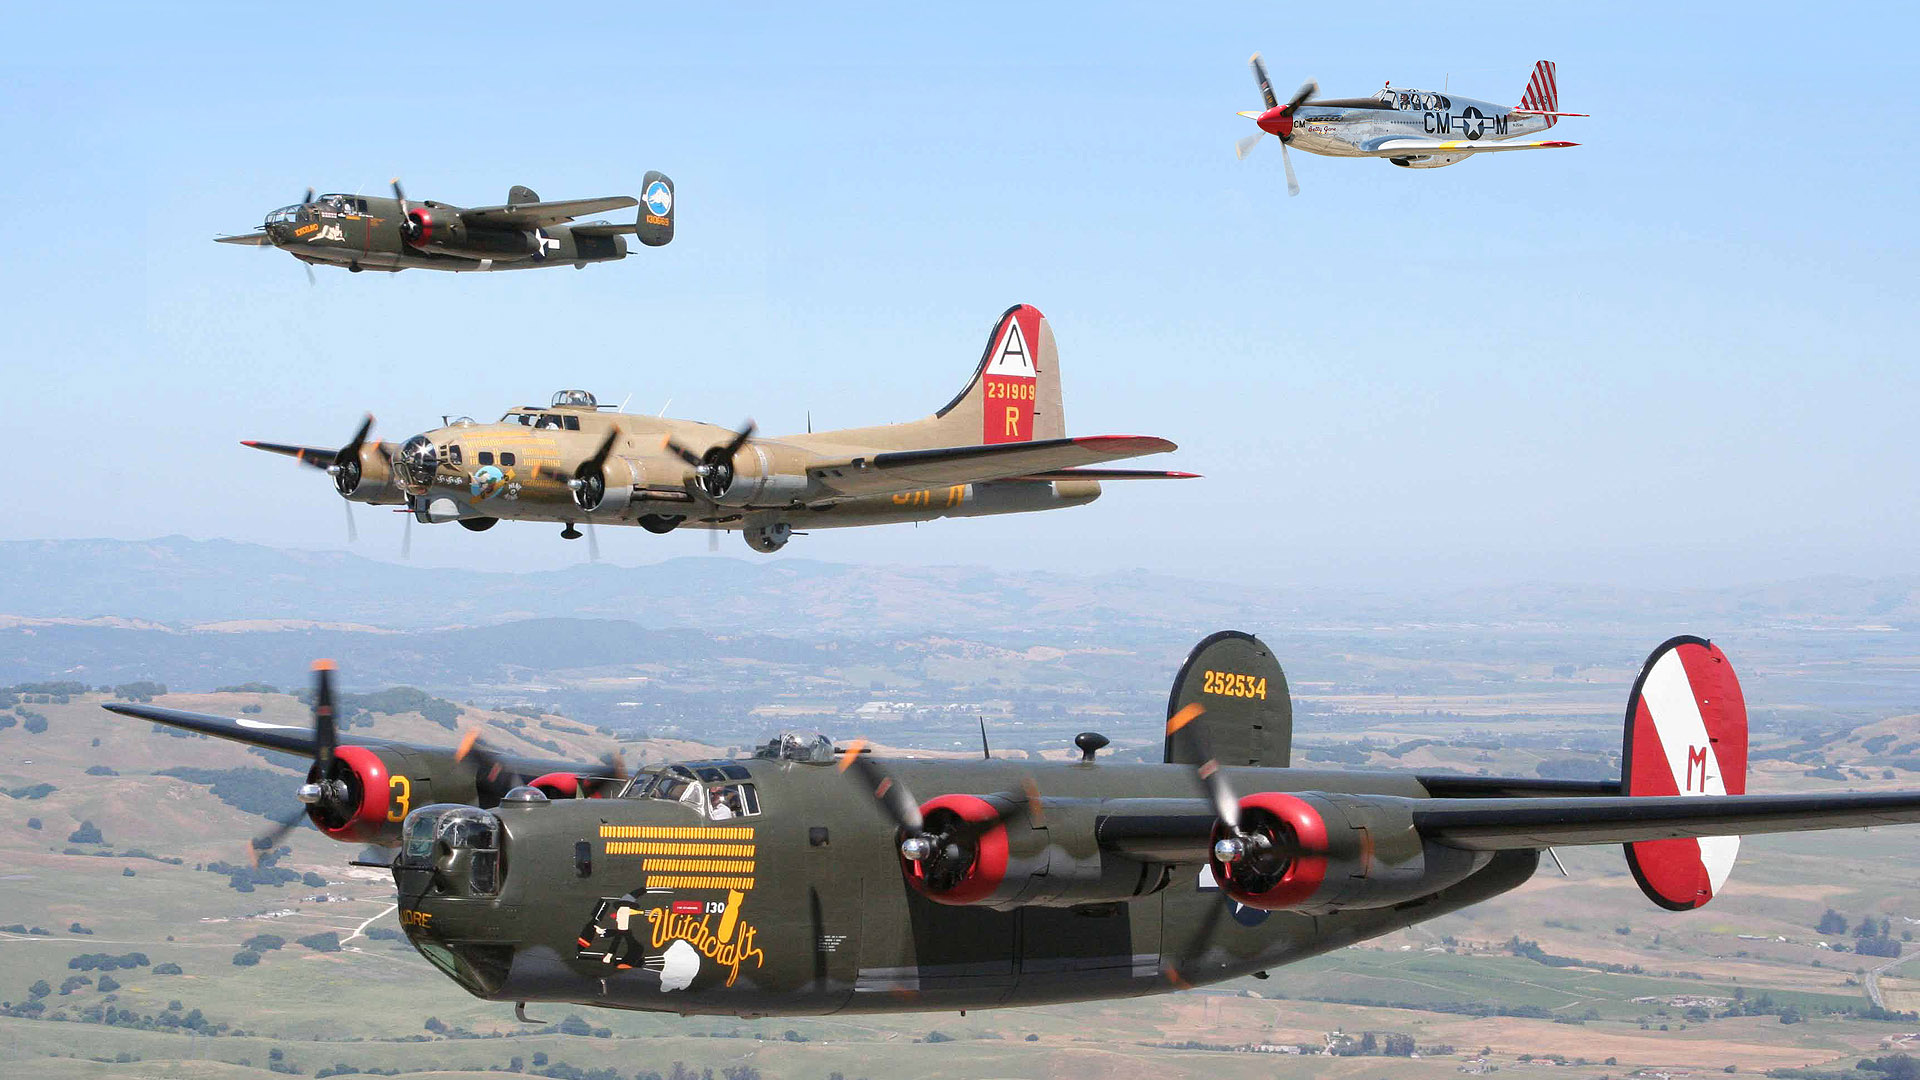 World War II military aircraft, including P-51 Mustang and B-25 Mitchell bombers.